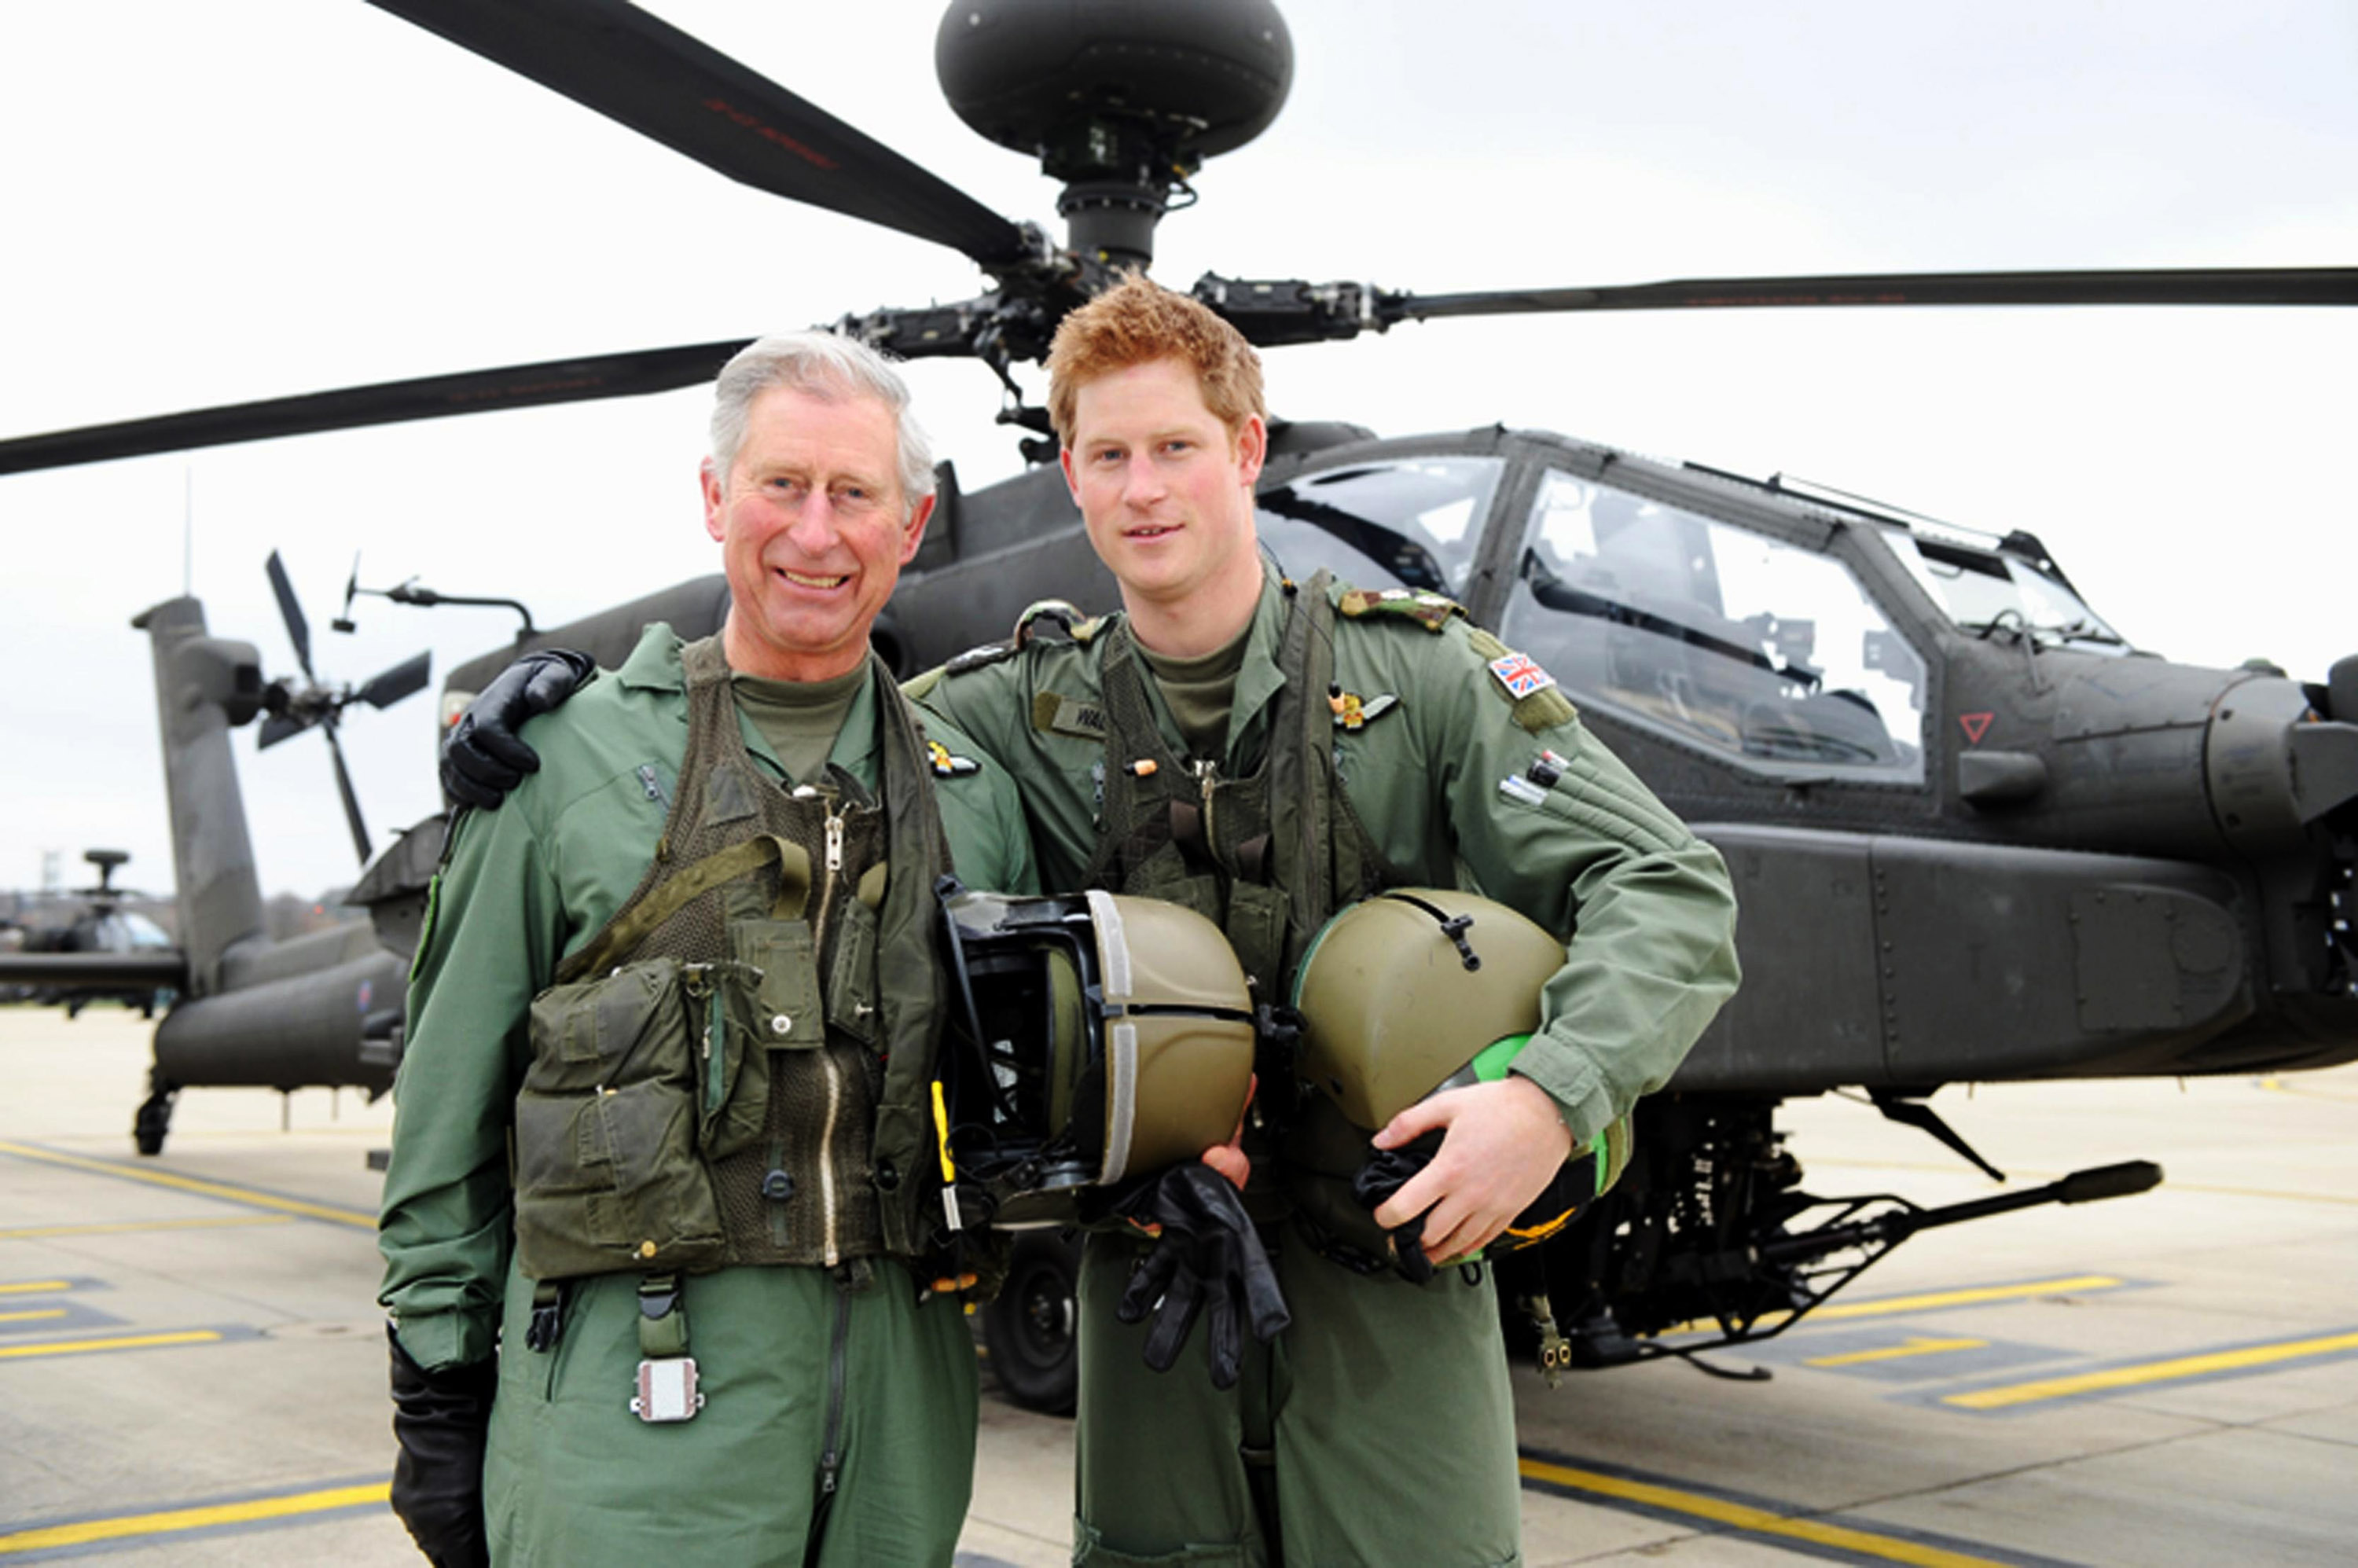 Prince Harry and his father, Prince Charles at the Army Aviation Centre on March 21, 2011 in Middle Wallop, England | Source: Getty Images